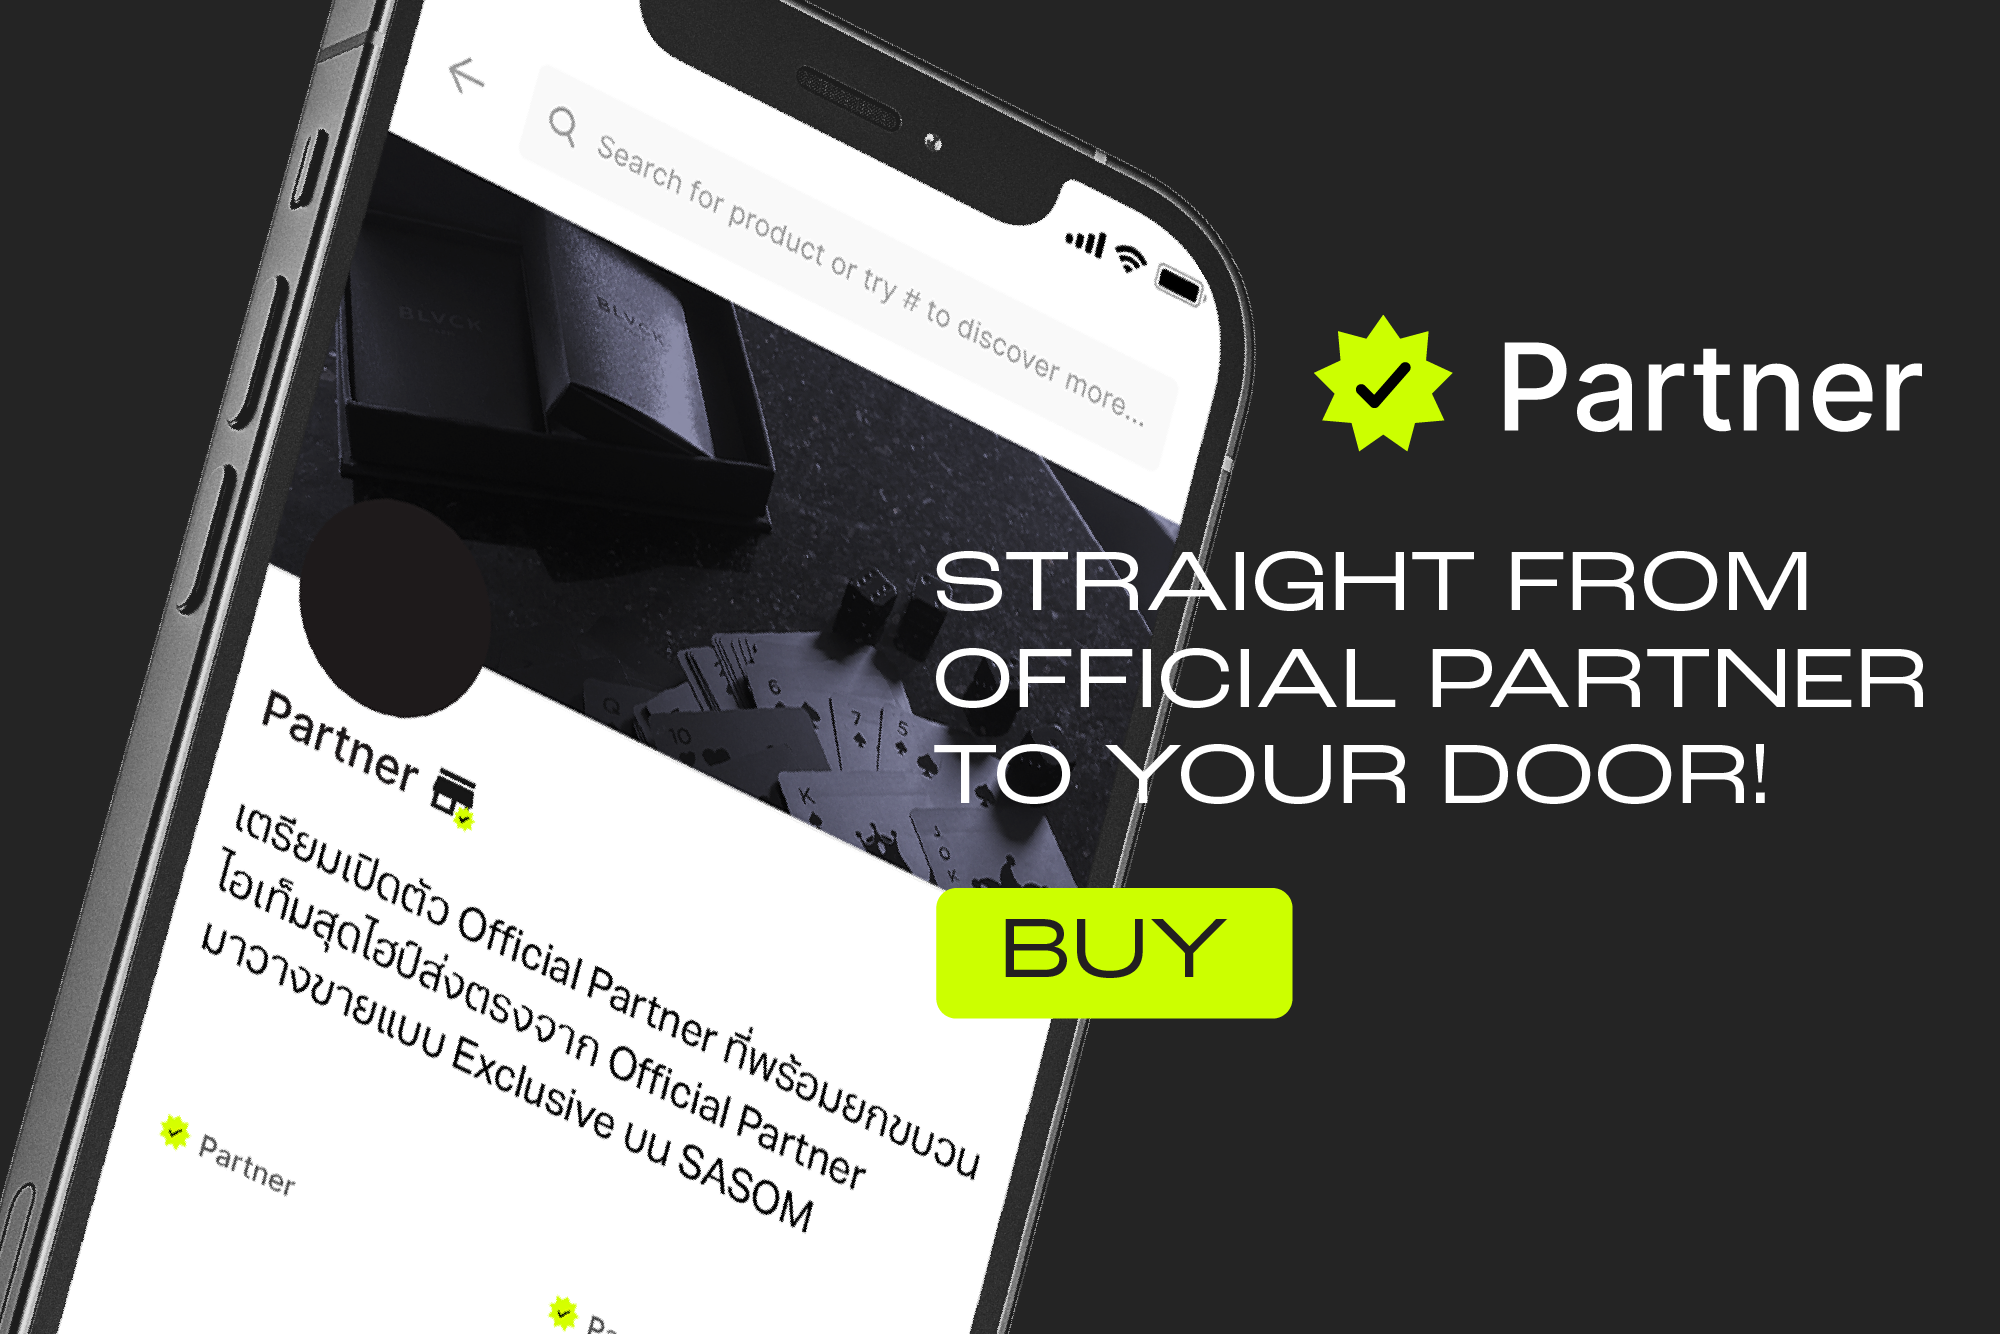 SASOM OFFICIAL PARTNER: Straight from Official Partner to Your Door!